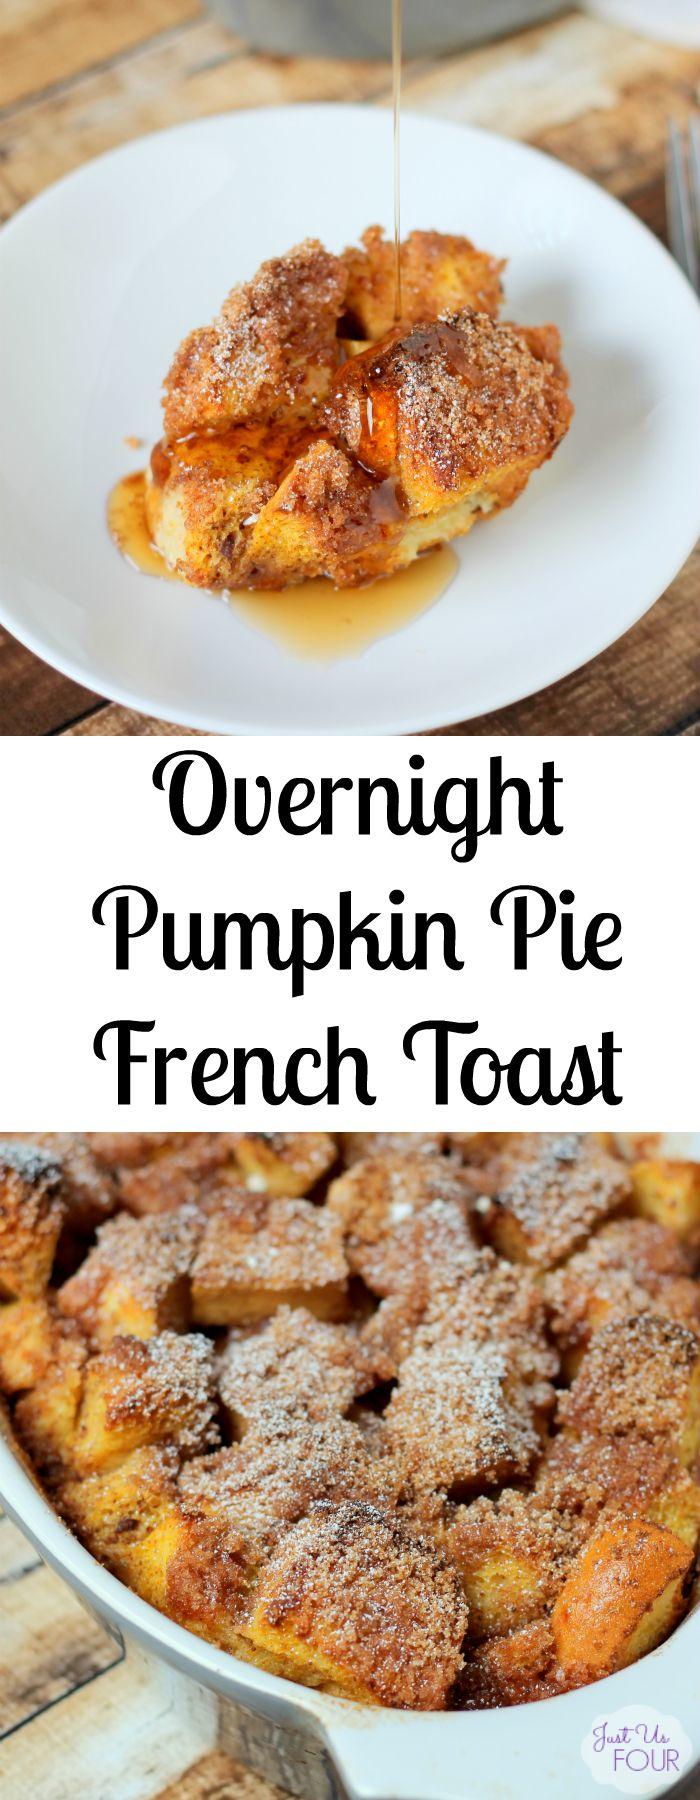 This overnight pumpkin pie french toast is the perfect fall breakfast! Do a little prep the night before and then wake up to a breakfast that is amazingly delicious and filled with pumpkin flavor.